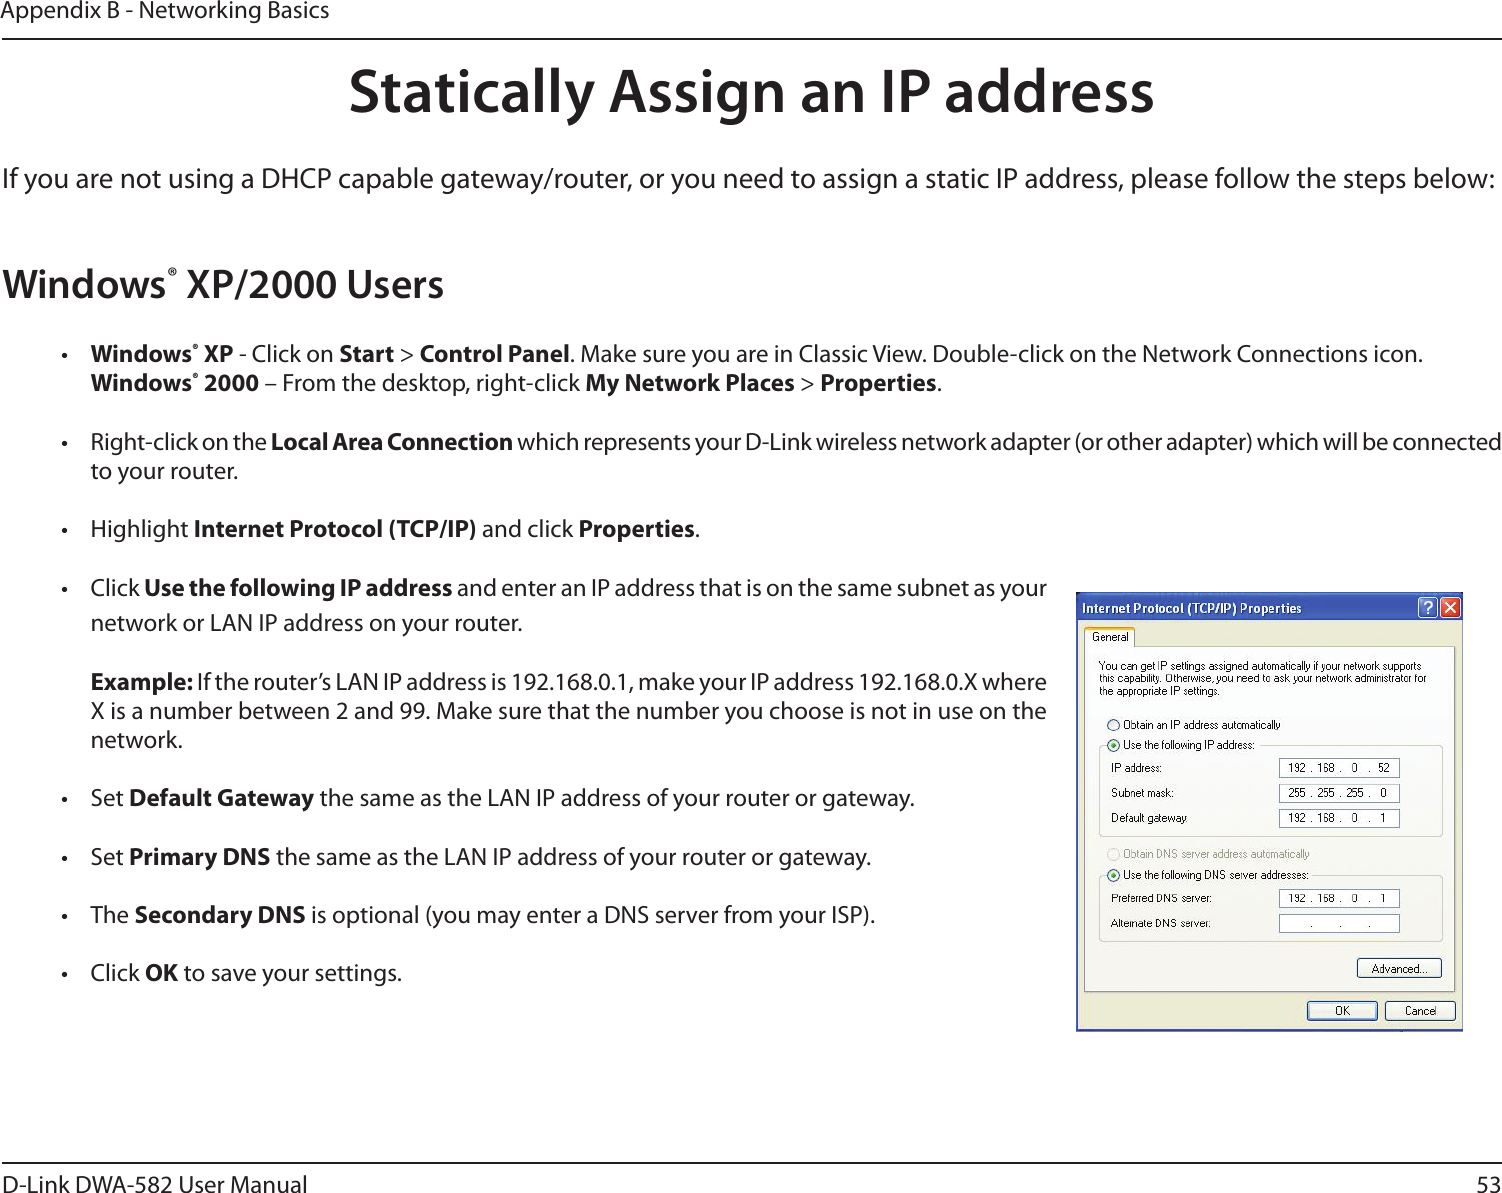 53D-Link DWA-582 User ManualAppendix B - Networking BasicsStatically Assign an IP addressIf you are not using a DHCP capable gateway/router, or you need to assign a static IP address, please follow the steps below:Windows® XP/2000 Users•  Windows® XP - Click on Start &gt; Control Panel. Make sure you are in Classic View. Double-click on the Network Connections icon. Windows® 2000 – From the desktop, right-click My Network Places &gt; Properties.•  Right-click on the Local Area Connection which represents your D-Link wireless network adapter (or other adapter) which will be connected to your router.• Highlight Internet Protocol (TCP/IP) and click Properties.• Click Use the following IP address and enter an IP address that is on the same subnet as your network or LAN IP address on your router. Example: If the router’s LAN IP address is 192.168.0.1, make your IP address 192.168.0.X where X is a number between 2 and 99. Make sure that the number you choose is not in use on the network. • Set Default Gateway the same as the LAN IP address of your router or gateway.• Set Primary DNS the same as the LAN IP address of your router or gateway. • The Secondary DNS is optional (you may enter a DNS server from your ISP).• Click OK to save your settings.